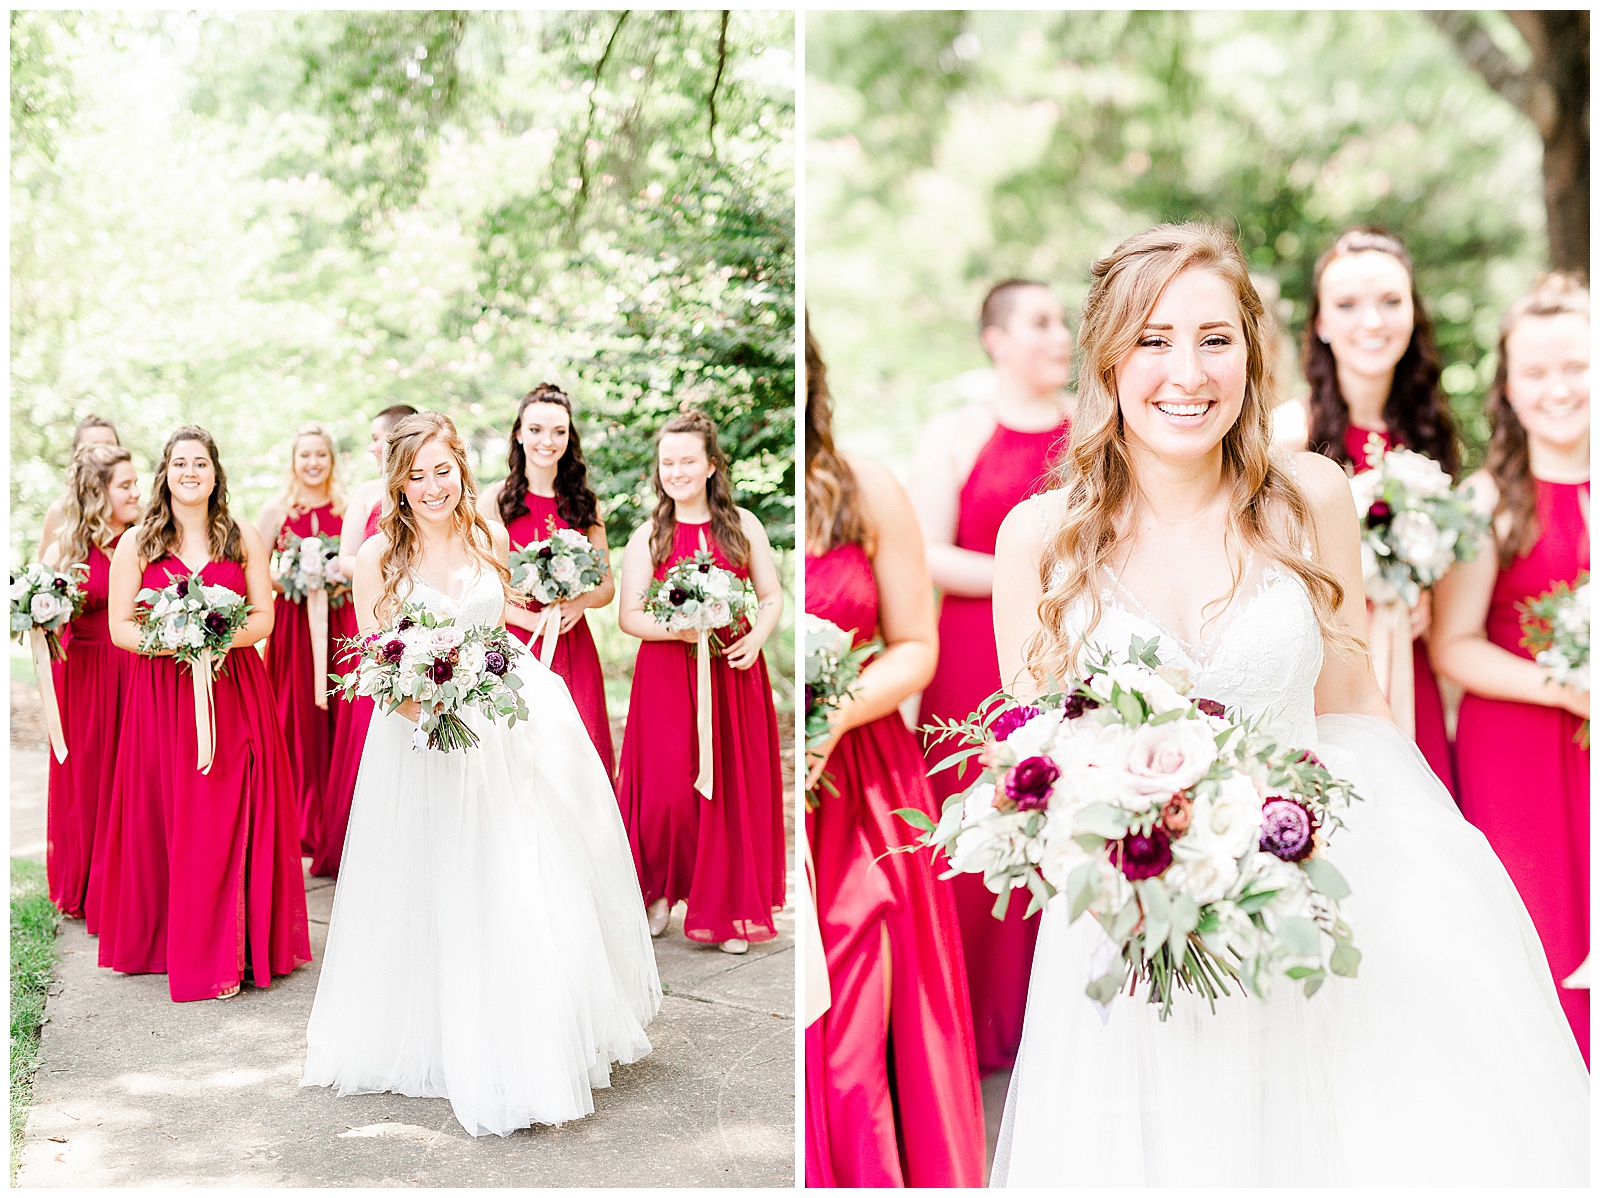 Matching Red Themed Bridesmaid Dresses from Elegant Modern Red and Navy Blue Themed Wedding in Charlotte, NC | check out the full wedding at KevynDixonPhoto.com